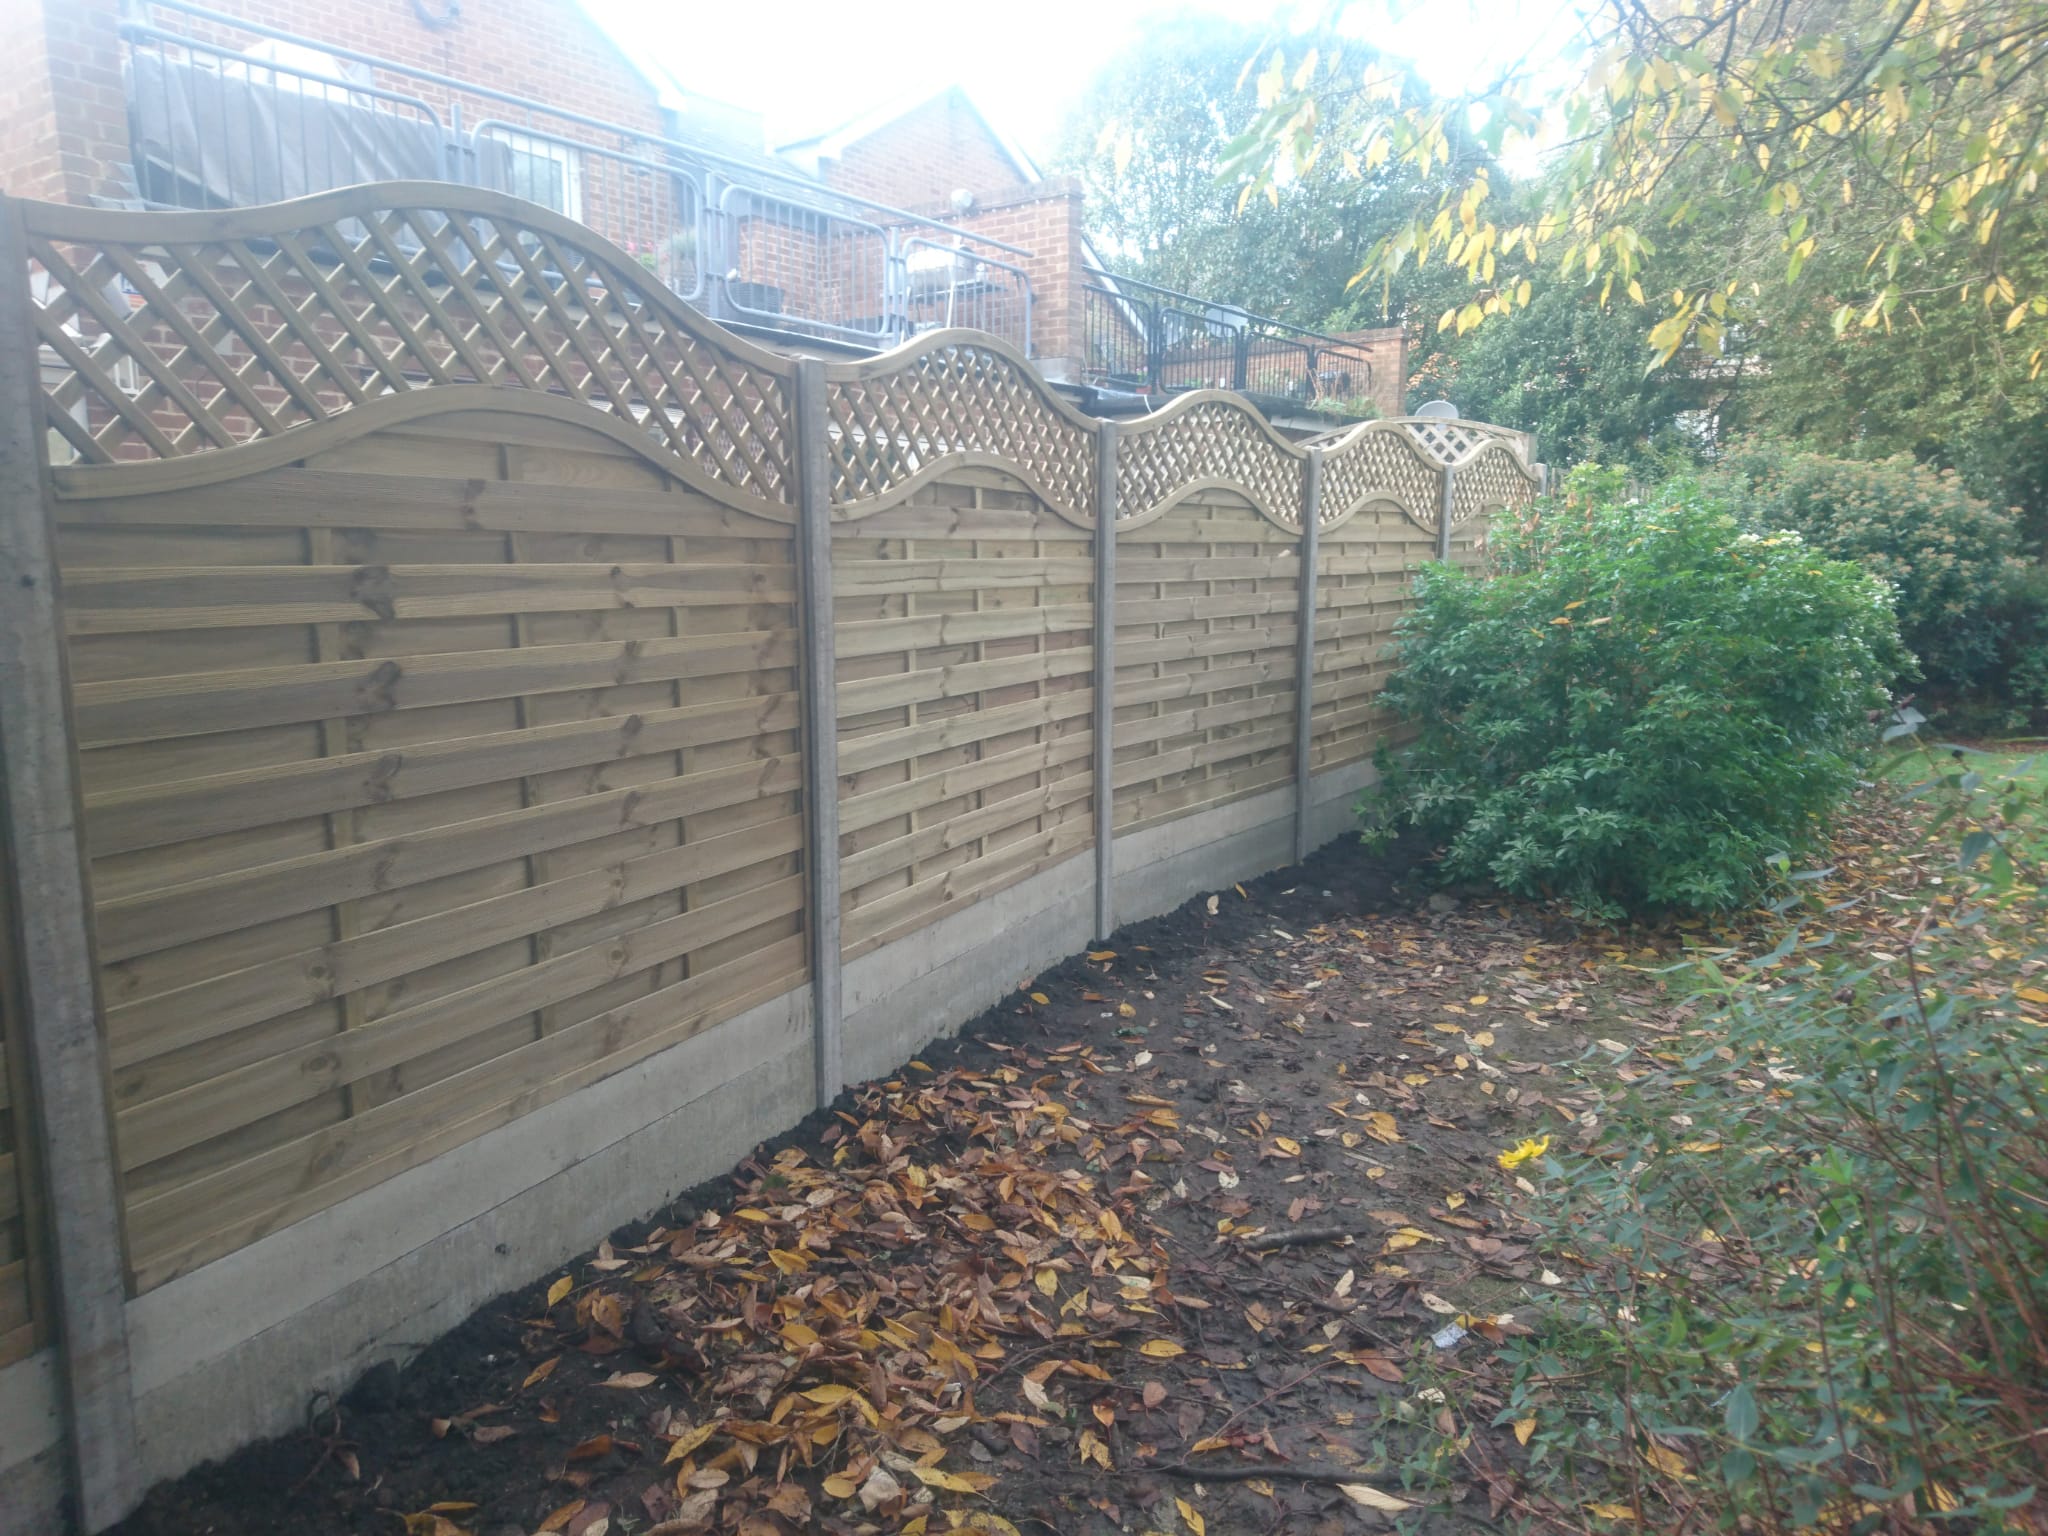 new fence fitted in Lee Lewisham SE13